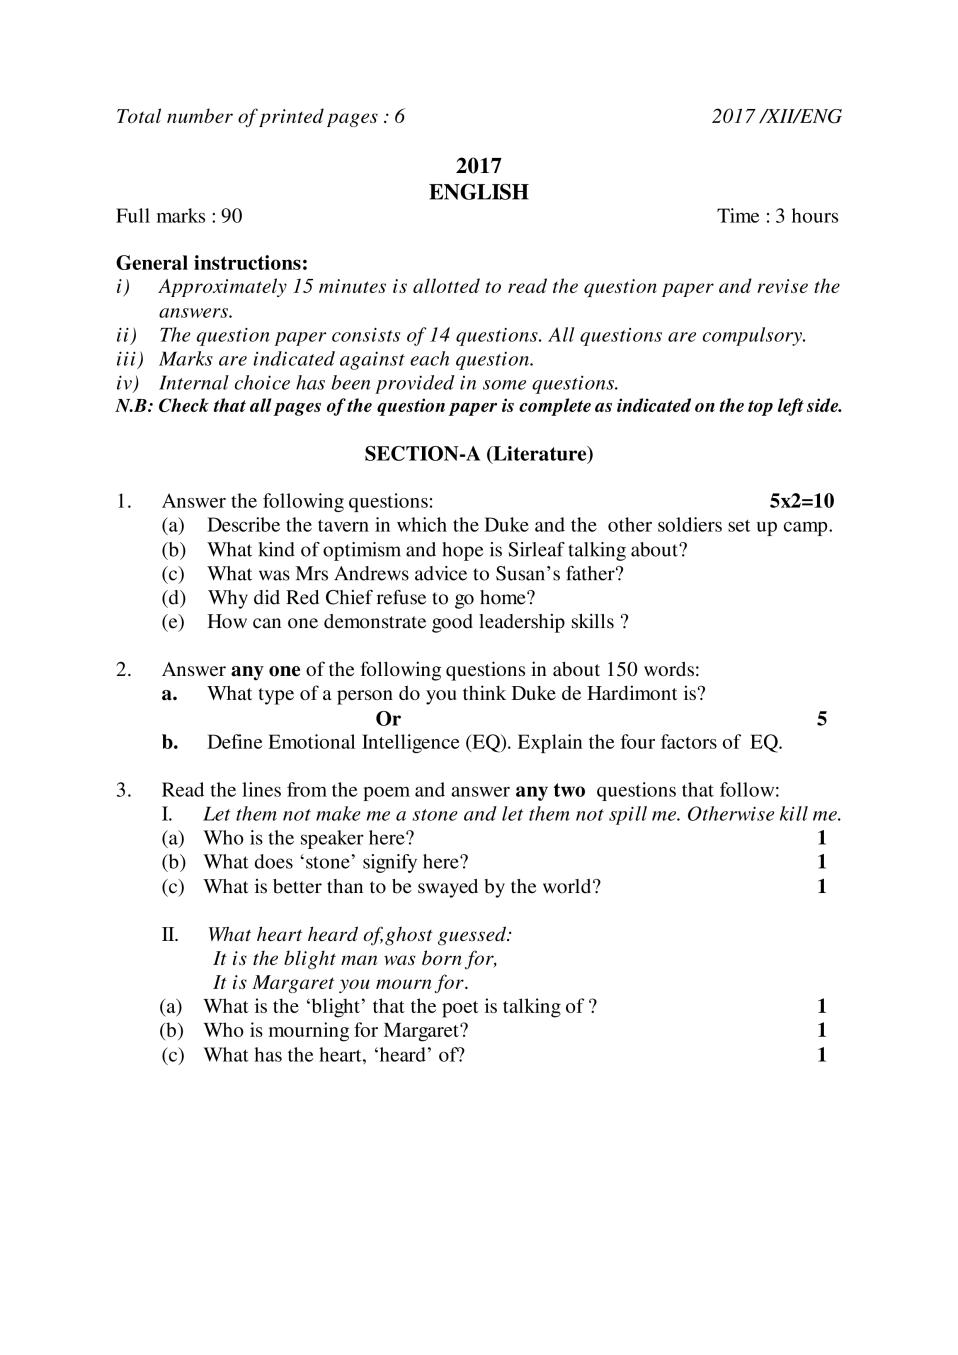 NBSE Class 12 Question Paper 2017 for English - Page 1